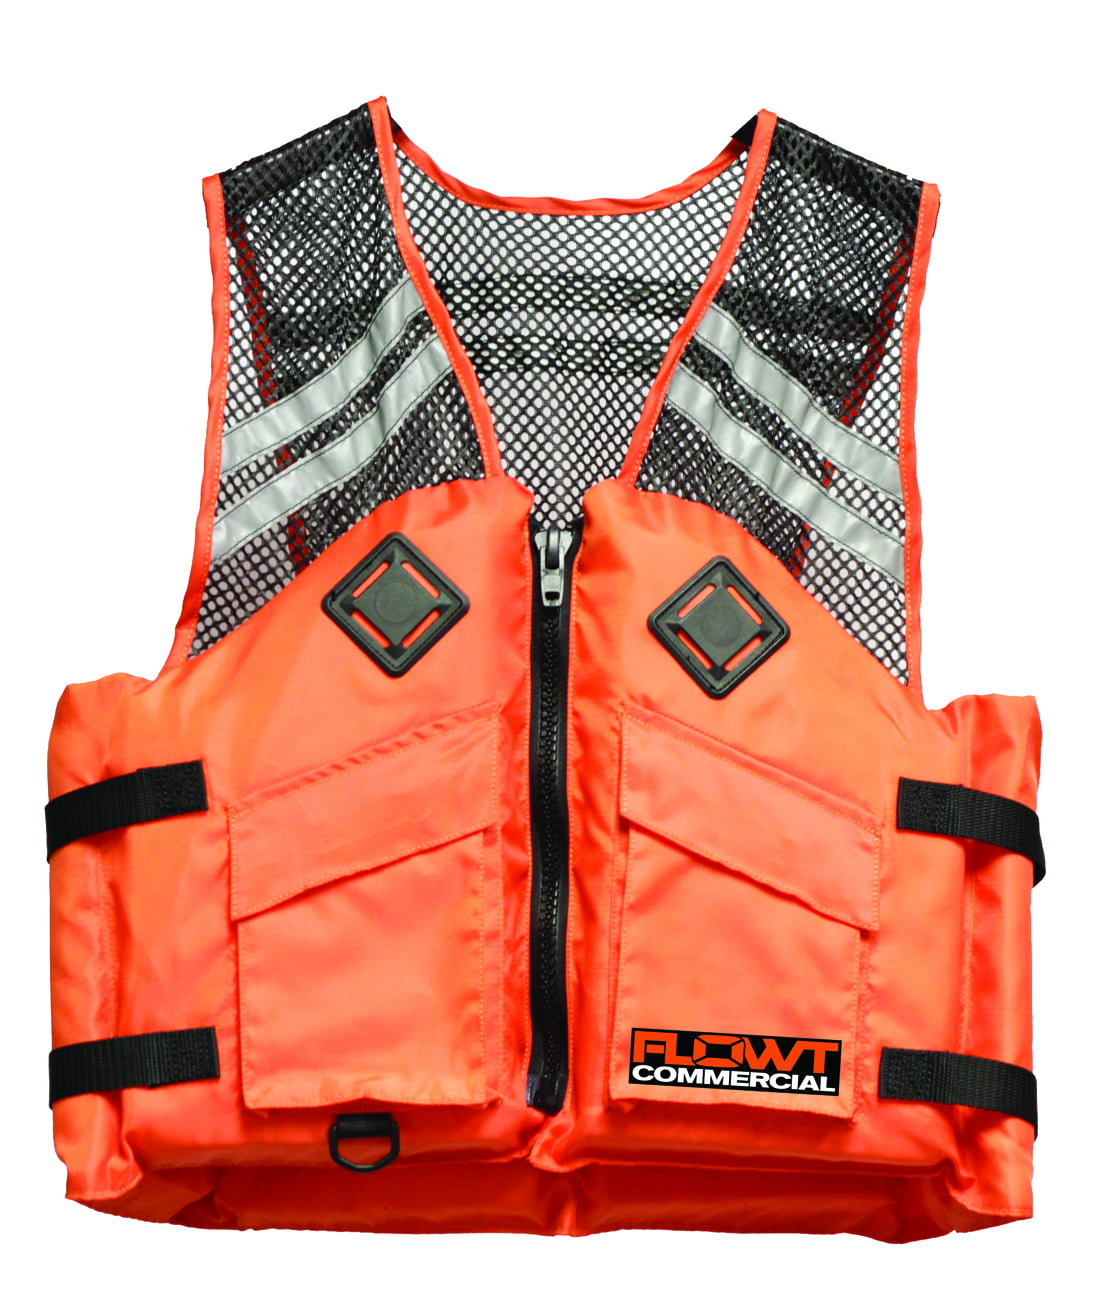 USCG Approved Type III PFD 2X Large/3X Large FLOWT Commercial Comfort Mesh Life Vest Orange 